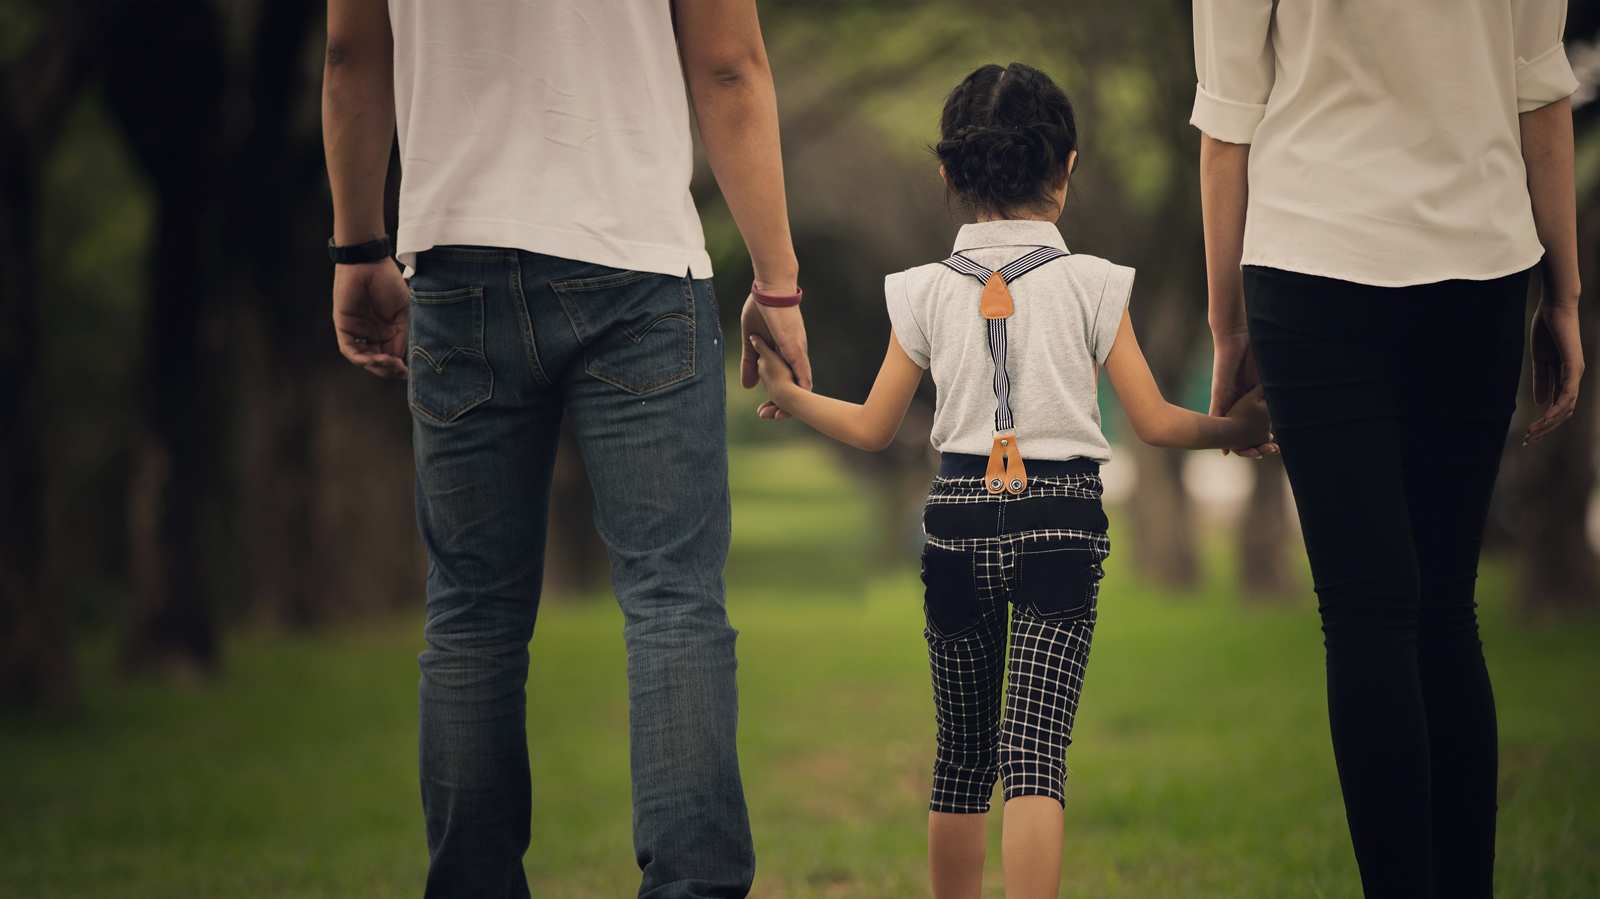 Parenting after divorce: It doesn’t have to get ugly if both parties can find middle ground